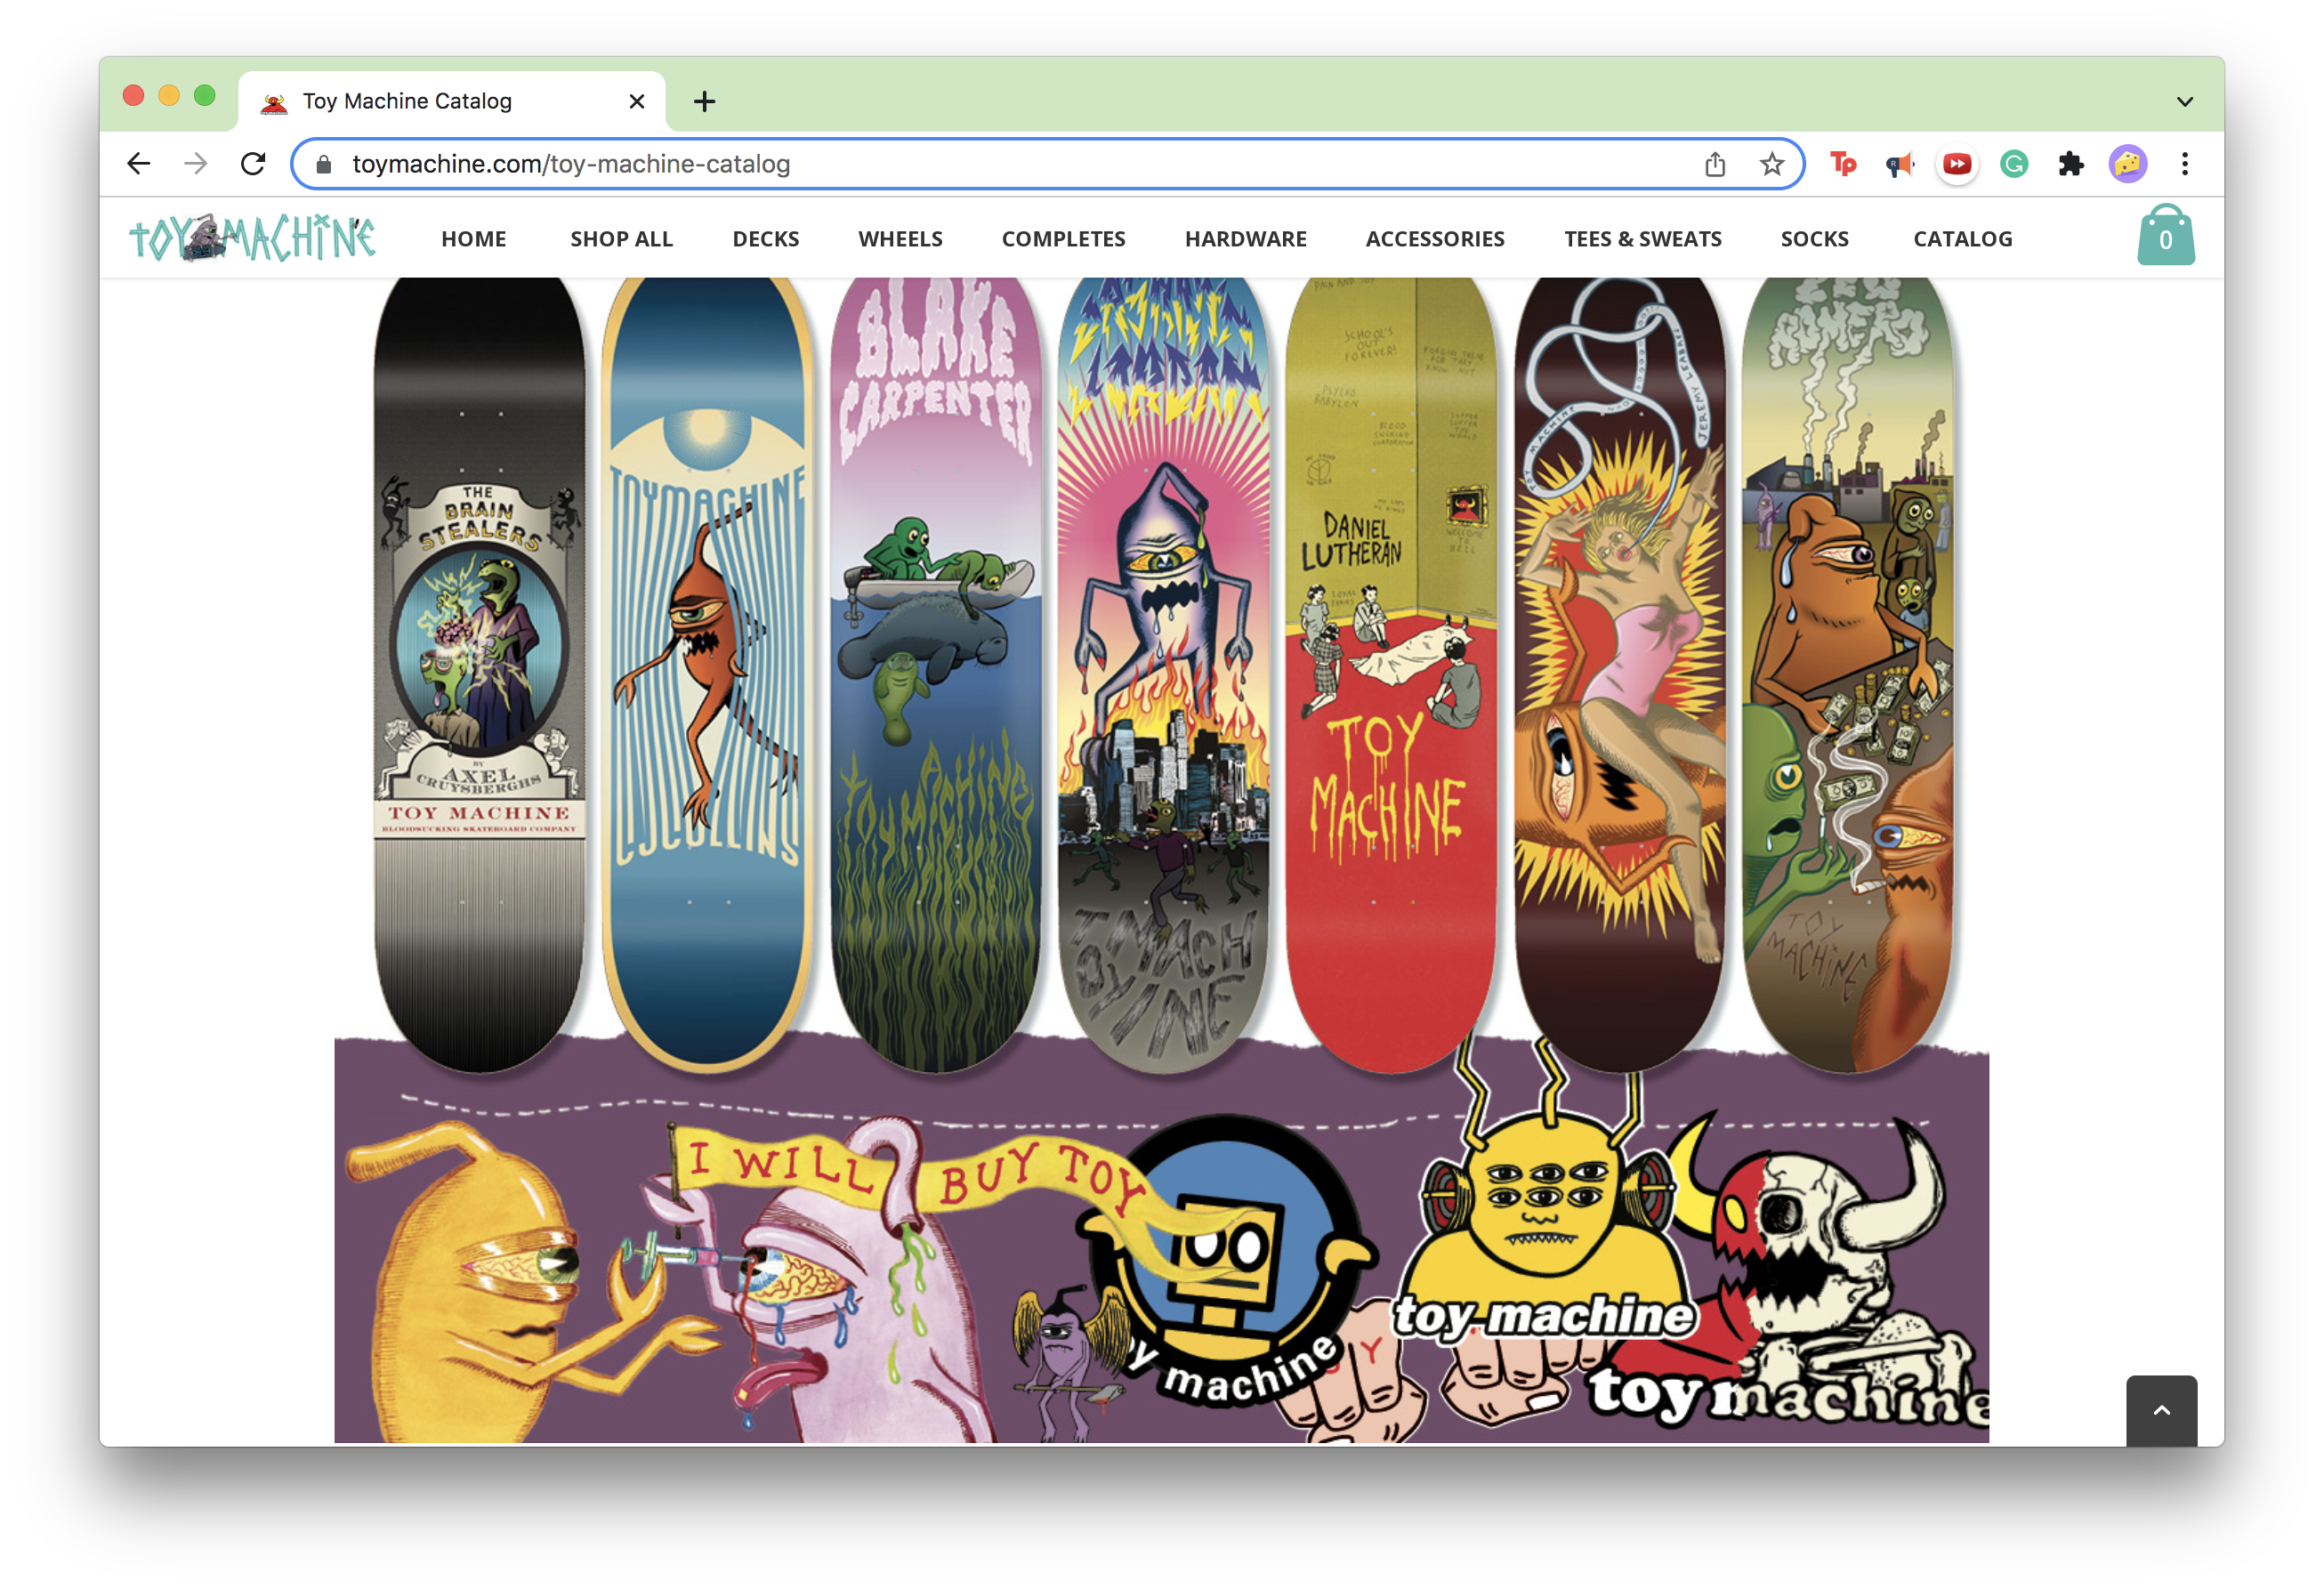 Screenshot of the home page of the Toy Machine website.